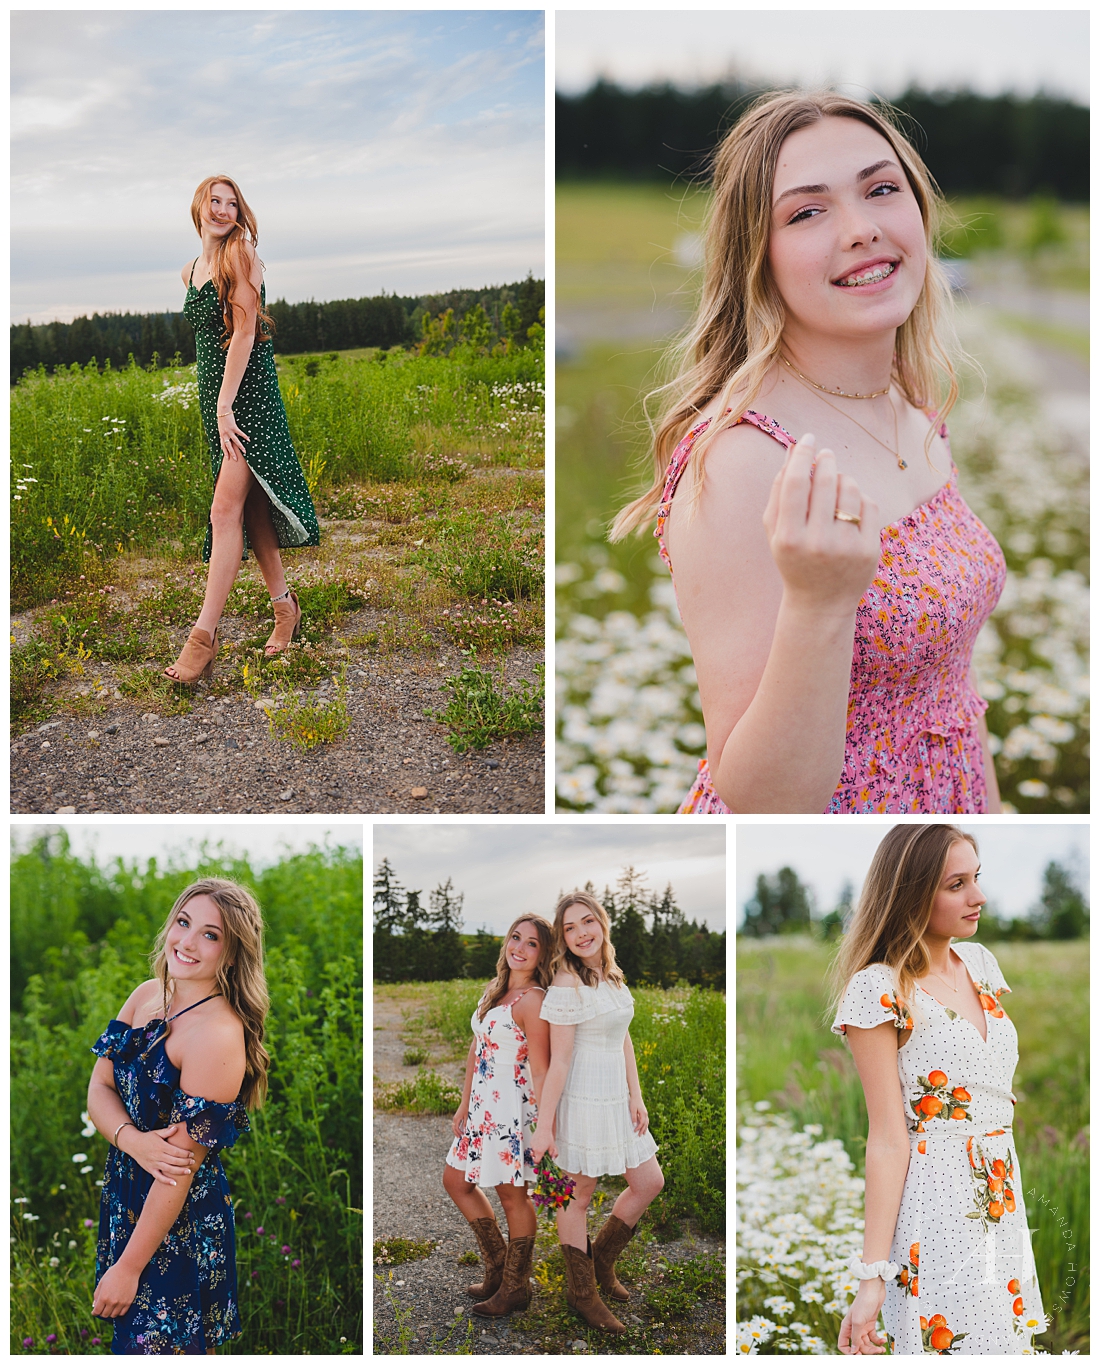 Tacoma Senior Portraits in Spring | Outfit Inspo, Pose Ideas, and Location Suggestions for High School Senior Girls in Washington | Photographed by the Best Tacoma Senior Photographer Amanda Howse